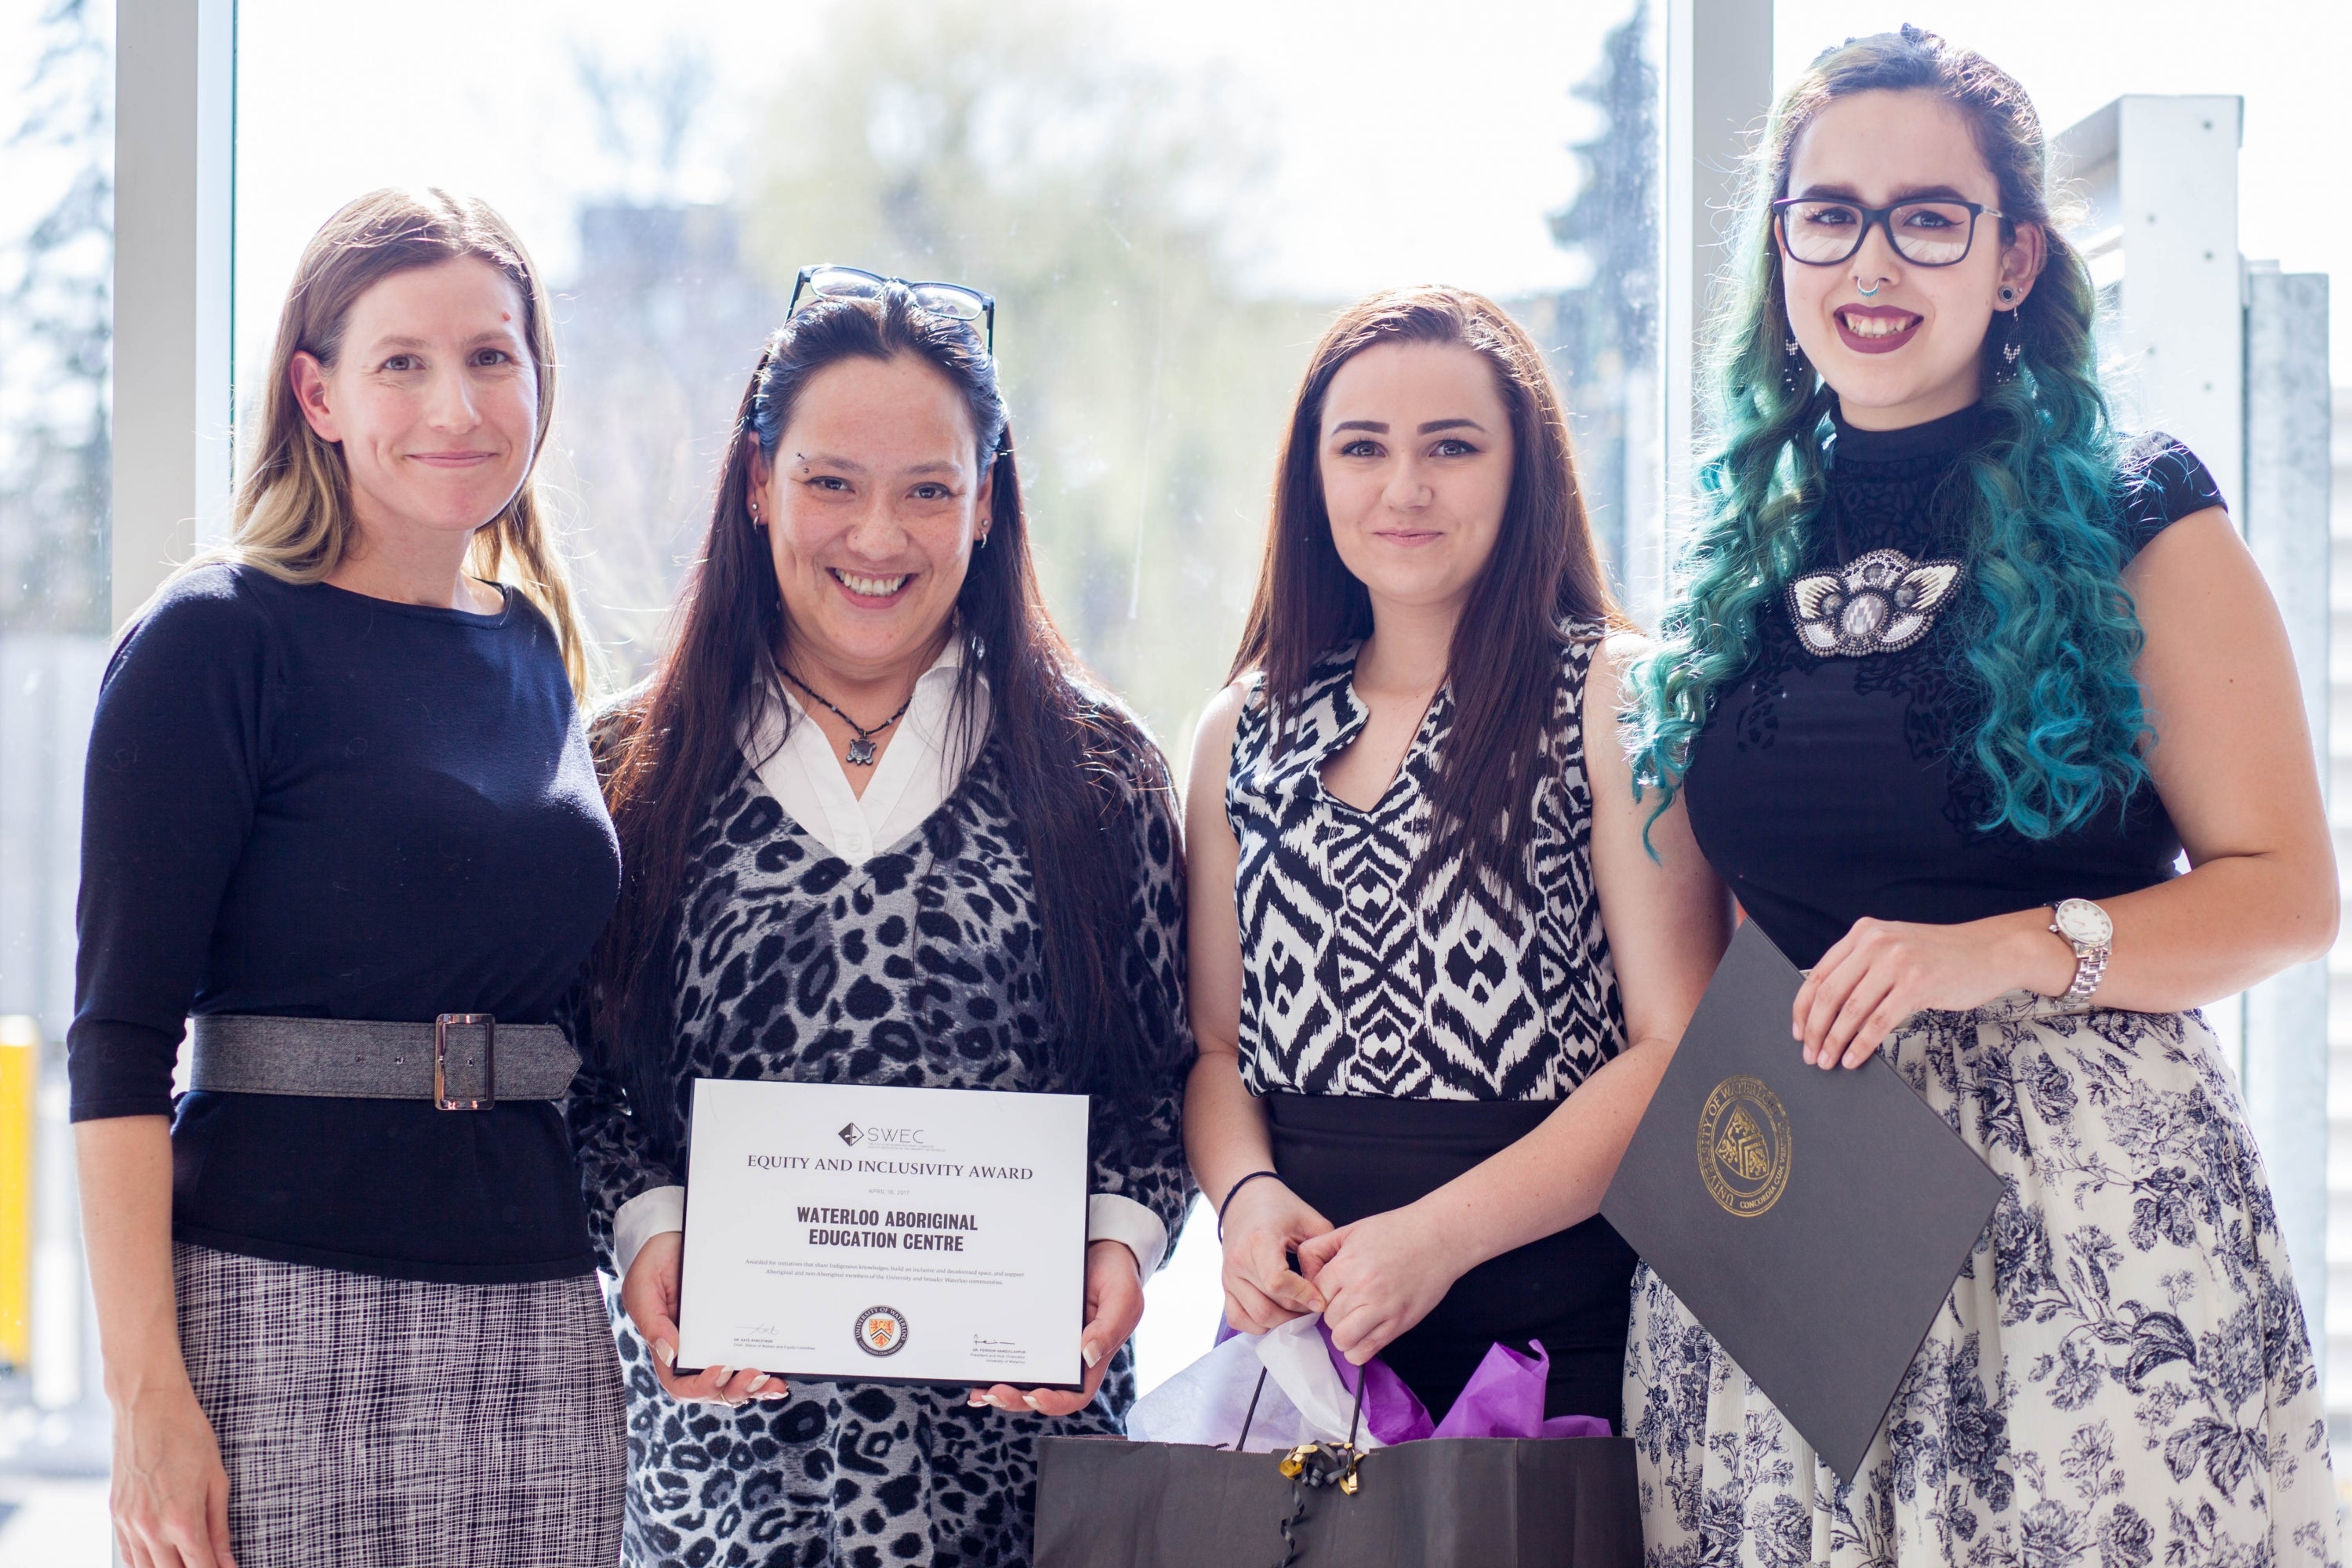 Group of 4 women, 3 are Indigenous students accepting the award